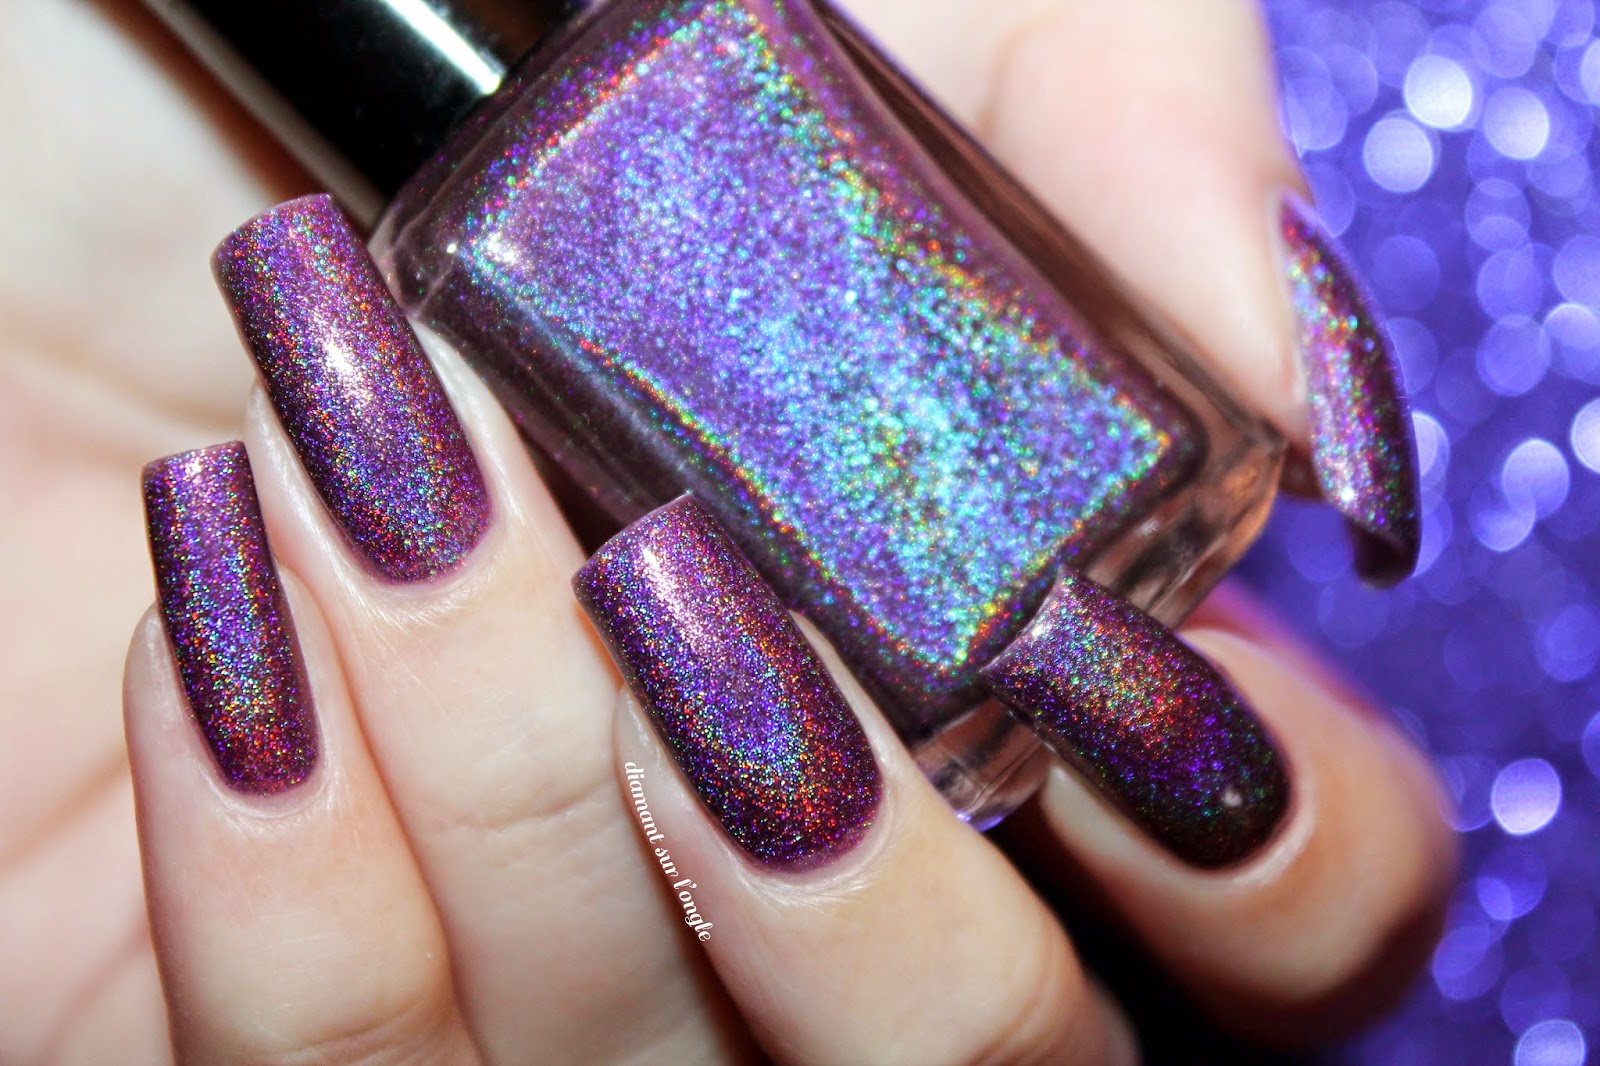 Swatch of April 2013 by Enchanted Polish